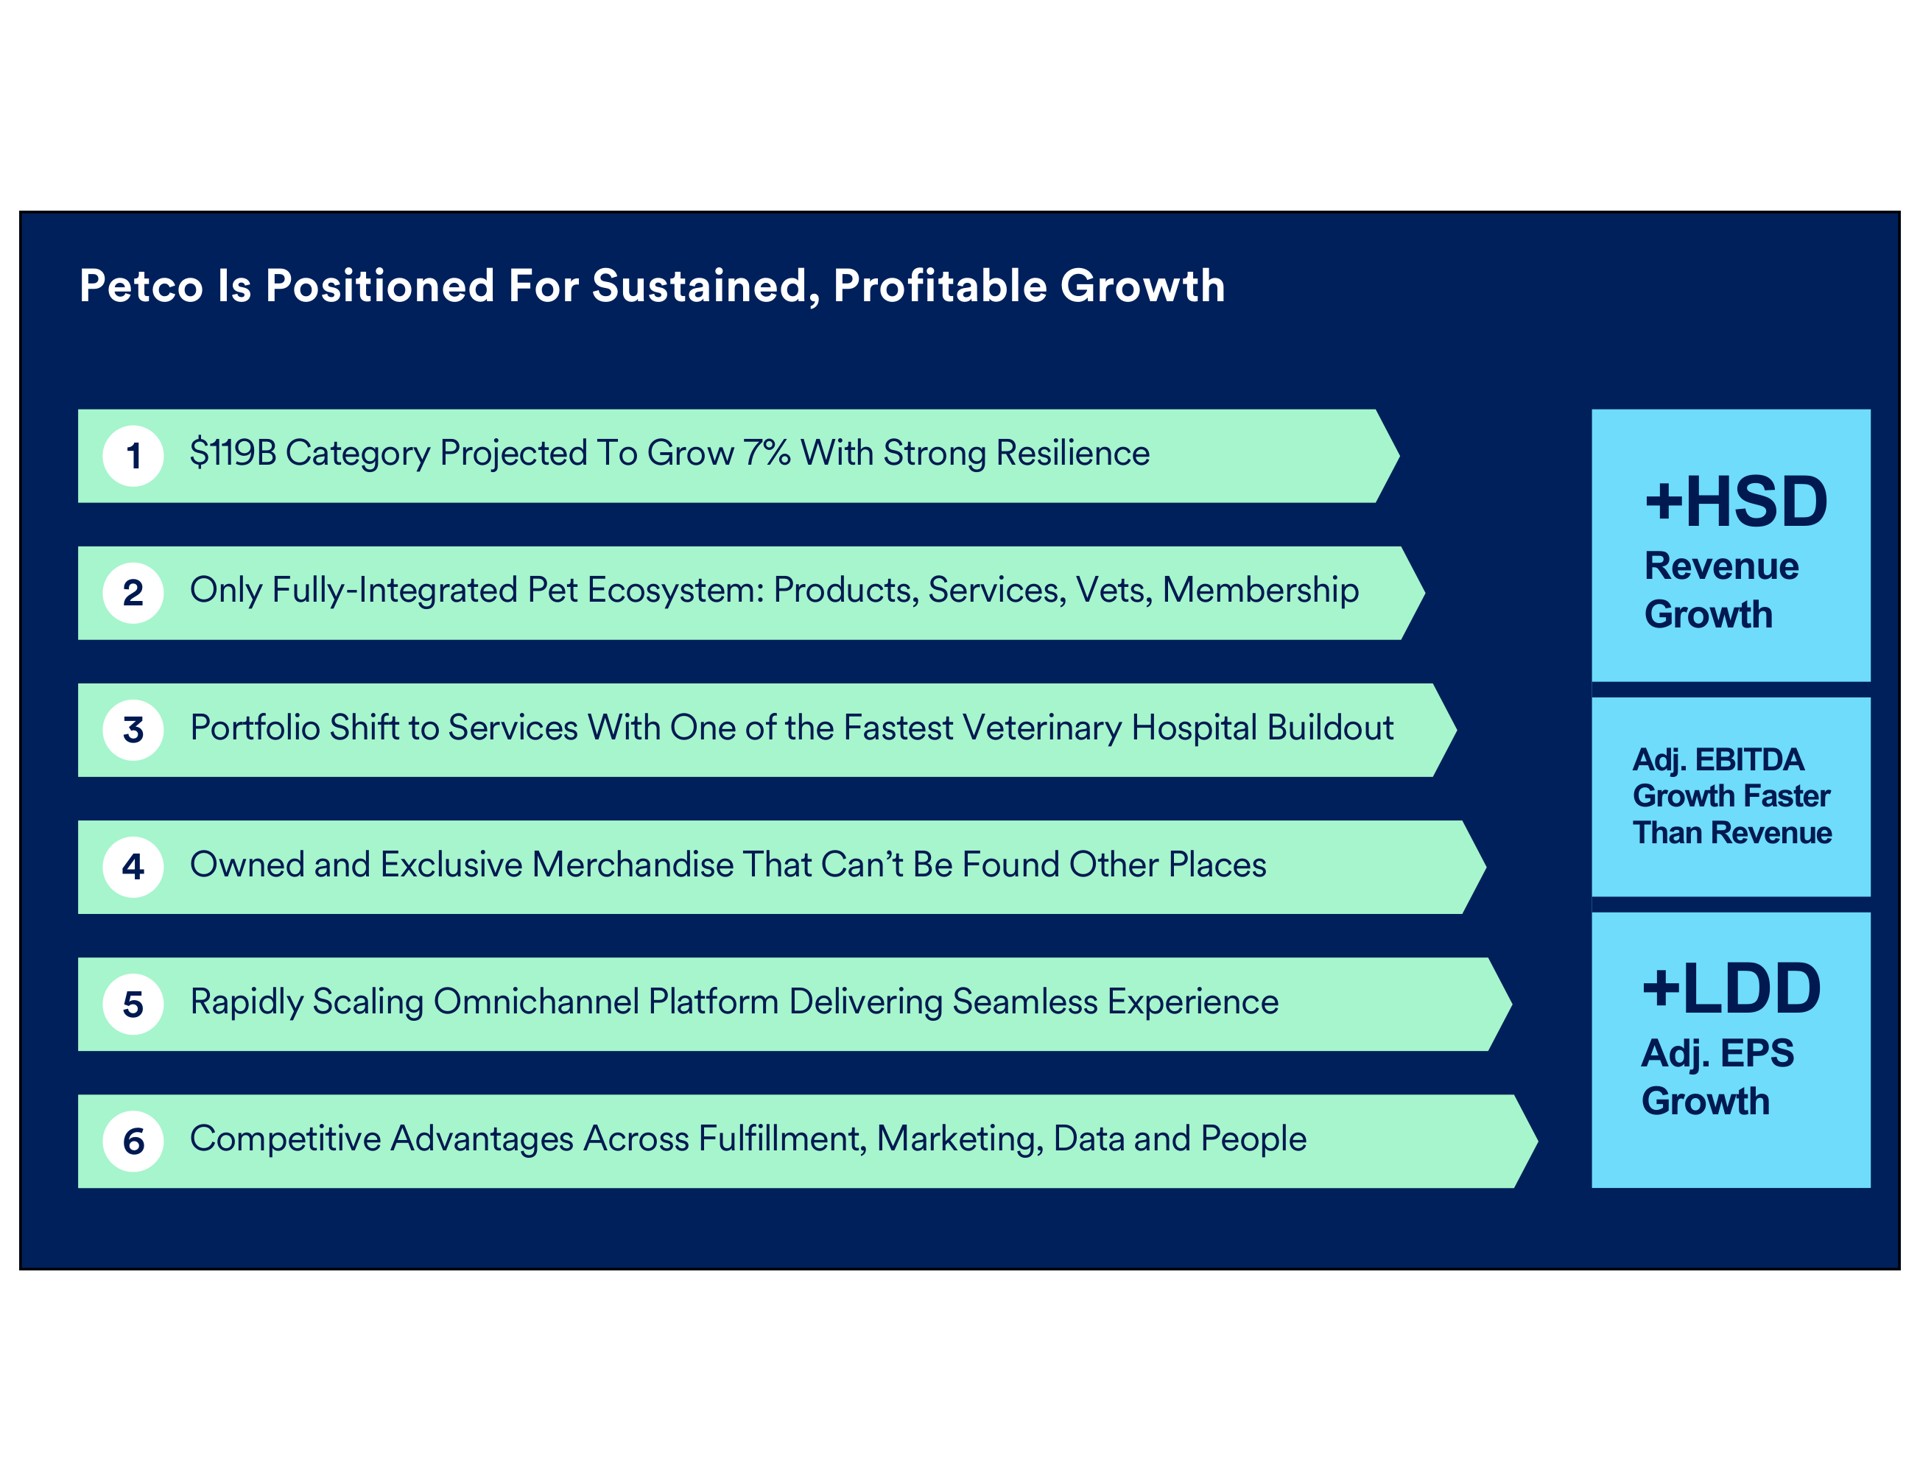 is positioned for sustained profitable growth category projected to grow with strong resilience only fully integrated pet ecosystem products services vets membership portfolio shift to services with one of the veterinary hospital revenue owned and exclusive merchandise that can be found other places competitive advantages across fulfillment marketing data and people rapidly scaling platform delivering seamless experience faster than revenue | Petco